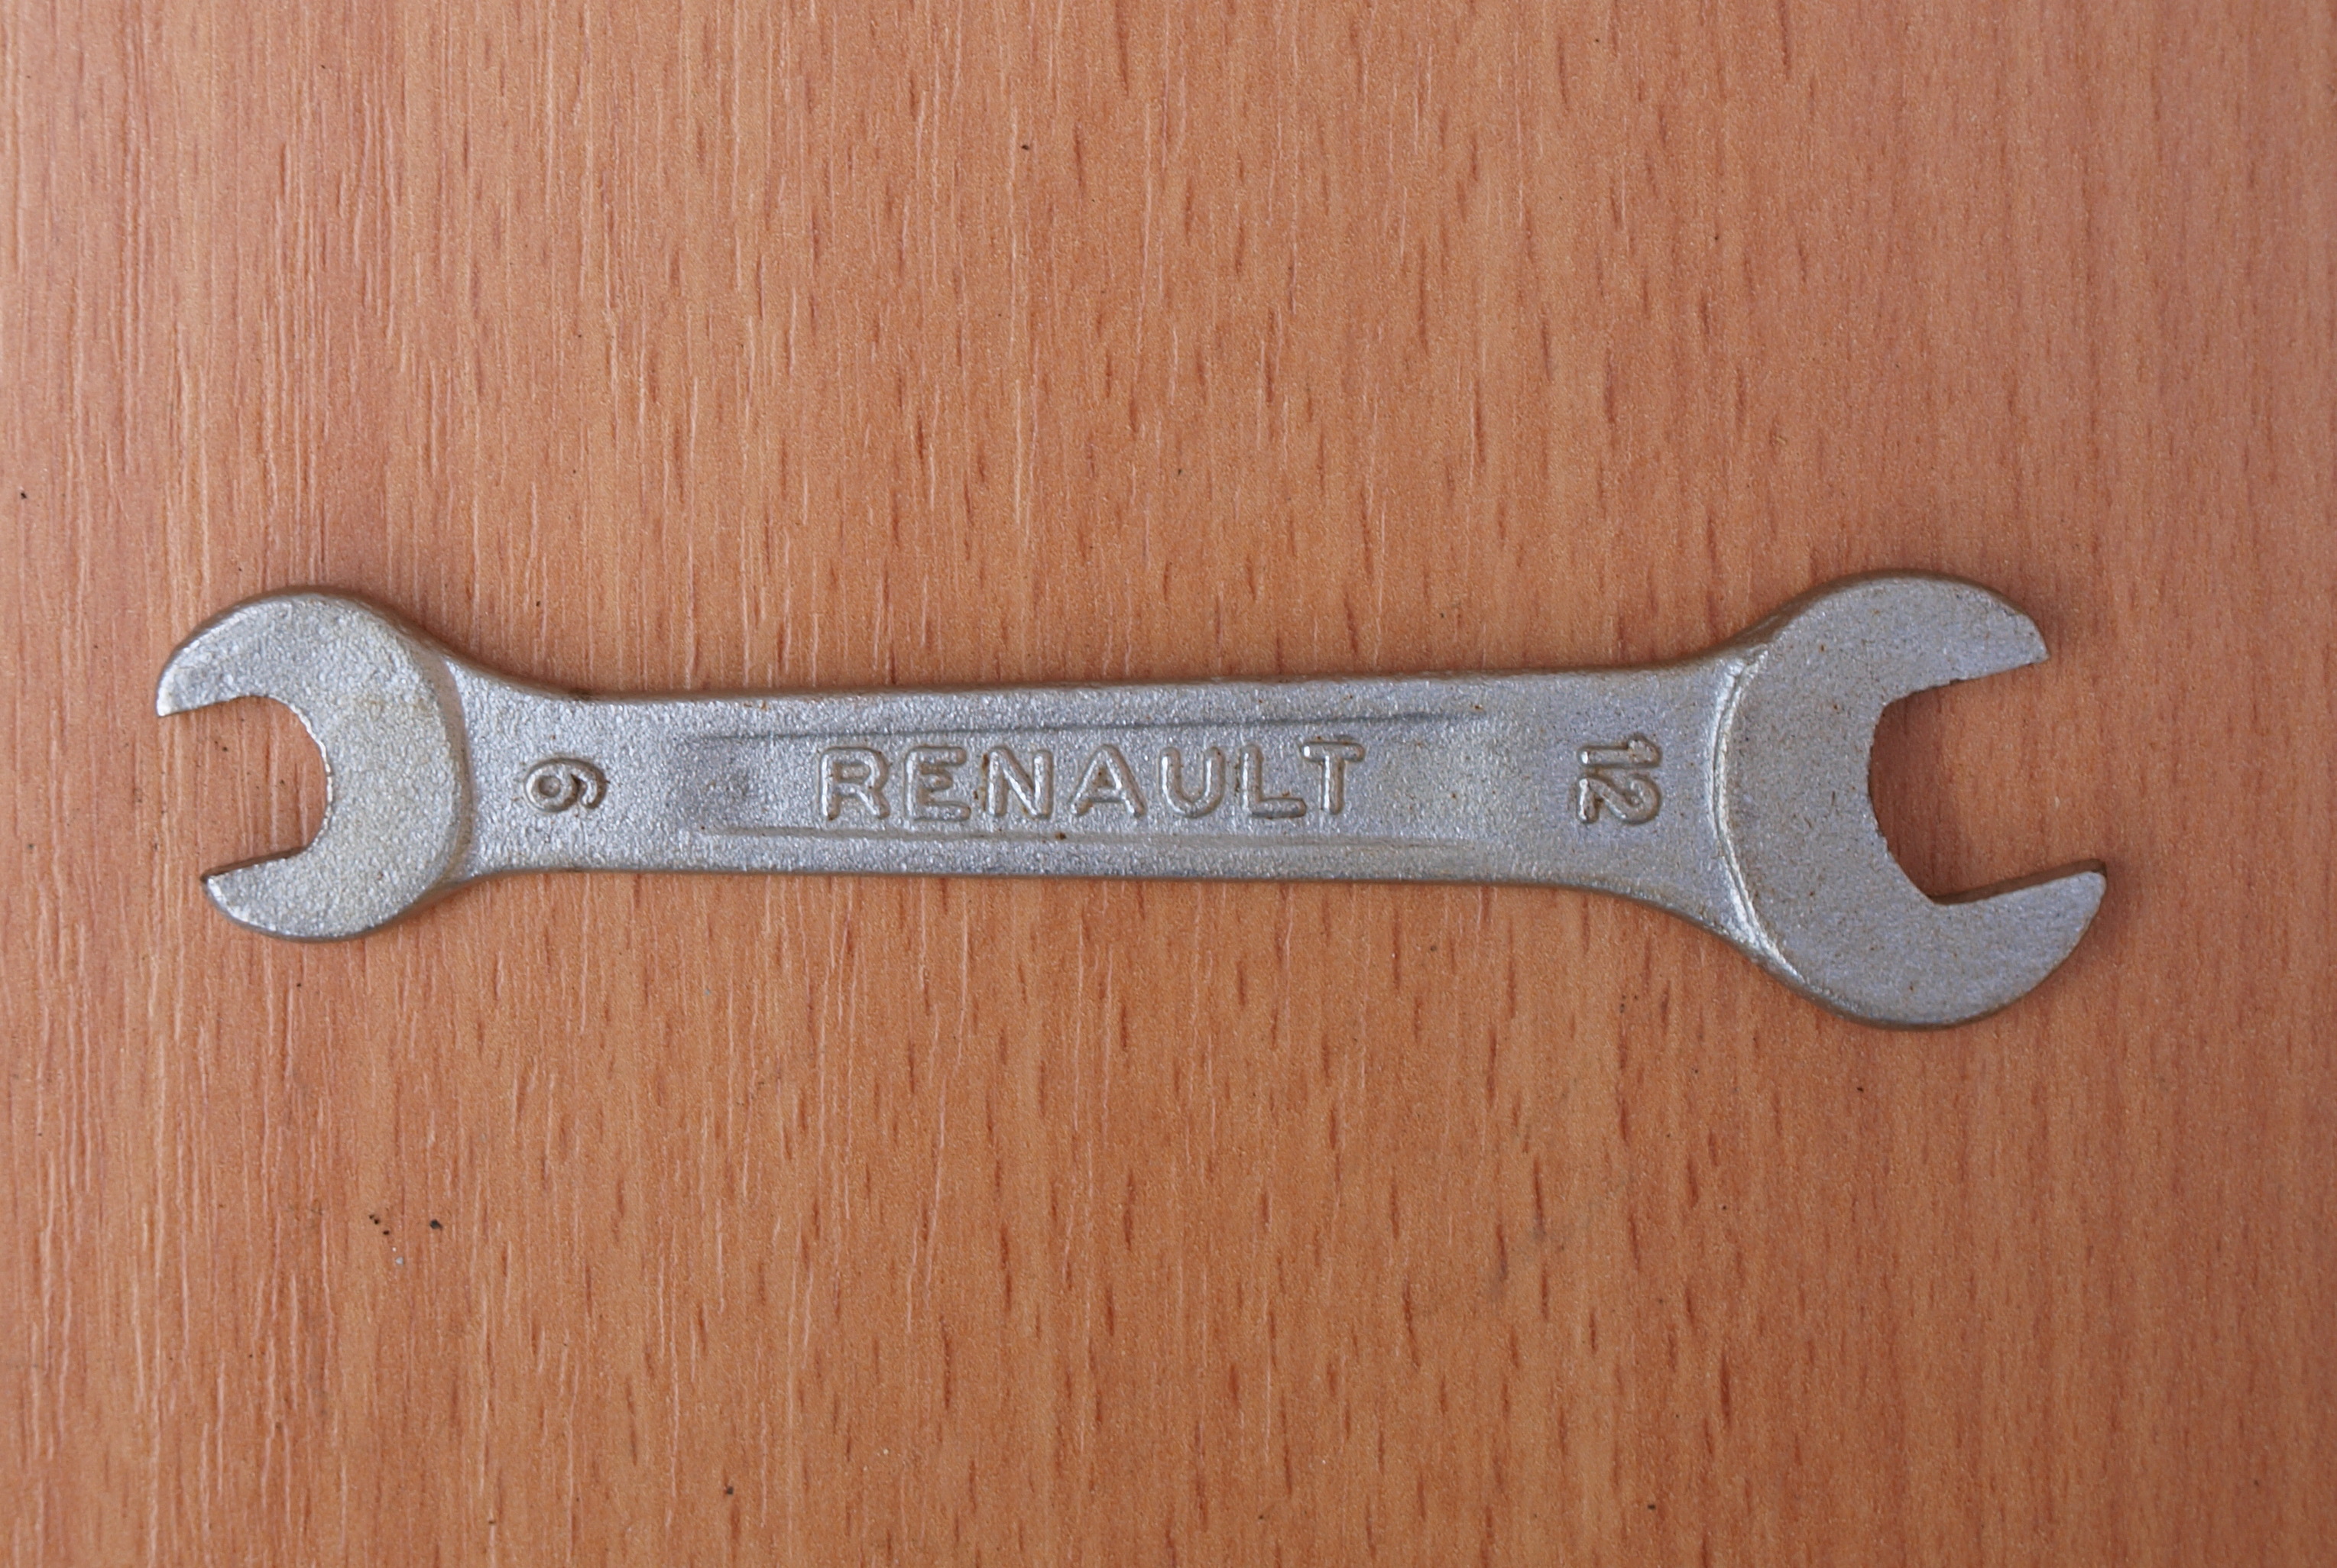 File:Clé plate 9-12 Renault.jpg - Wikimedia Commons